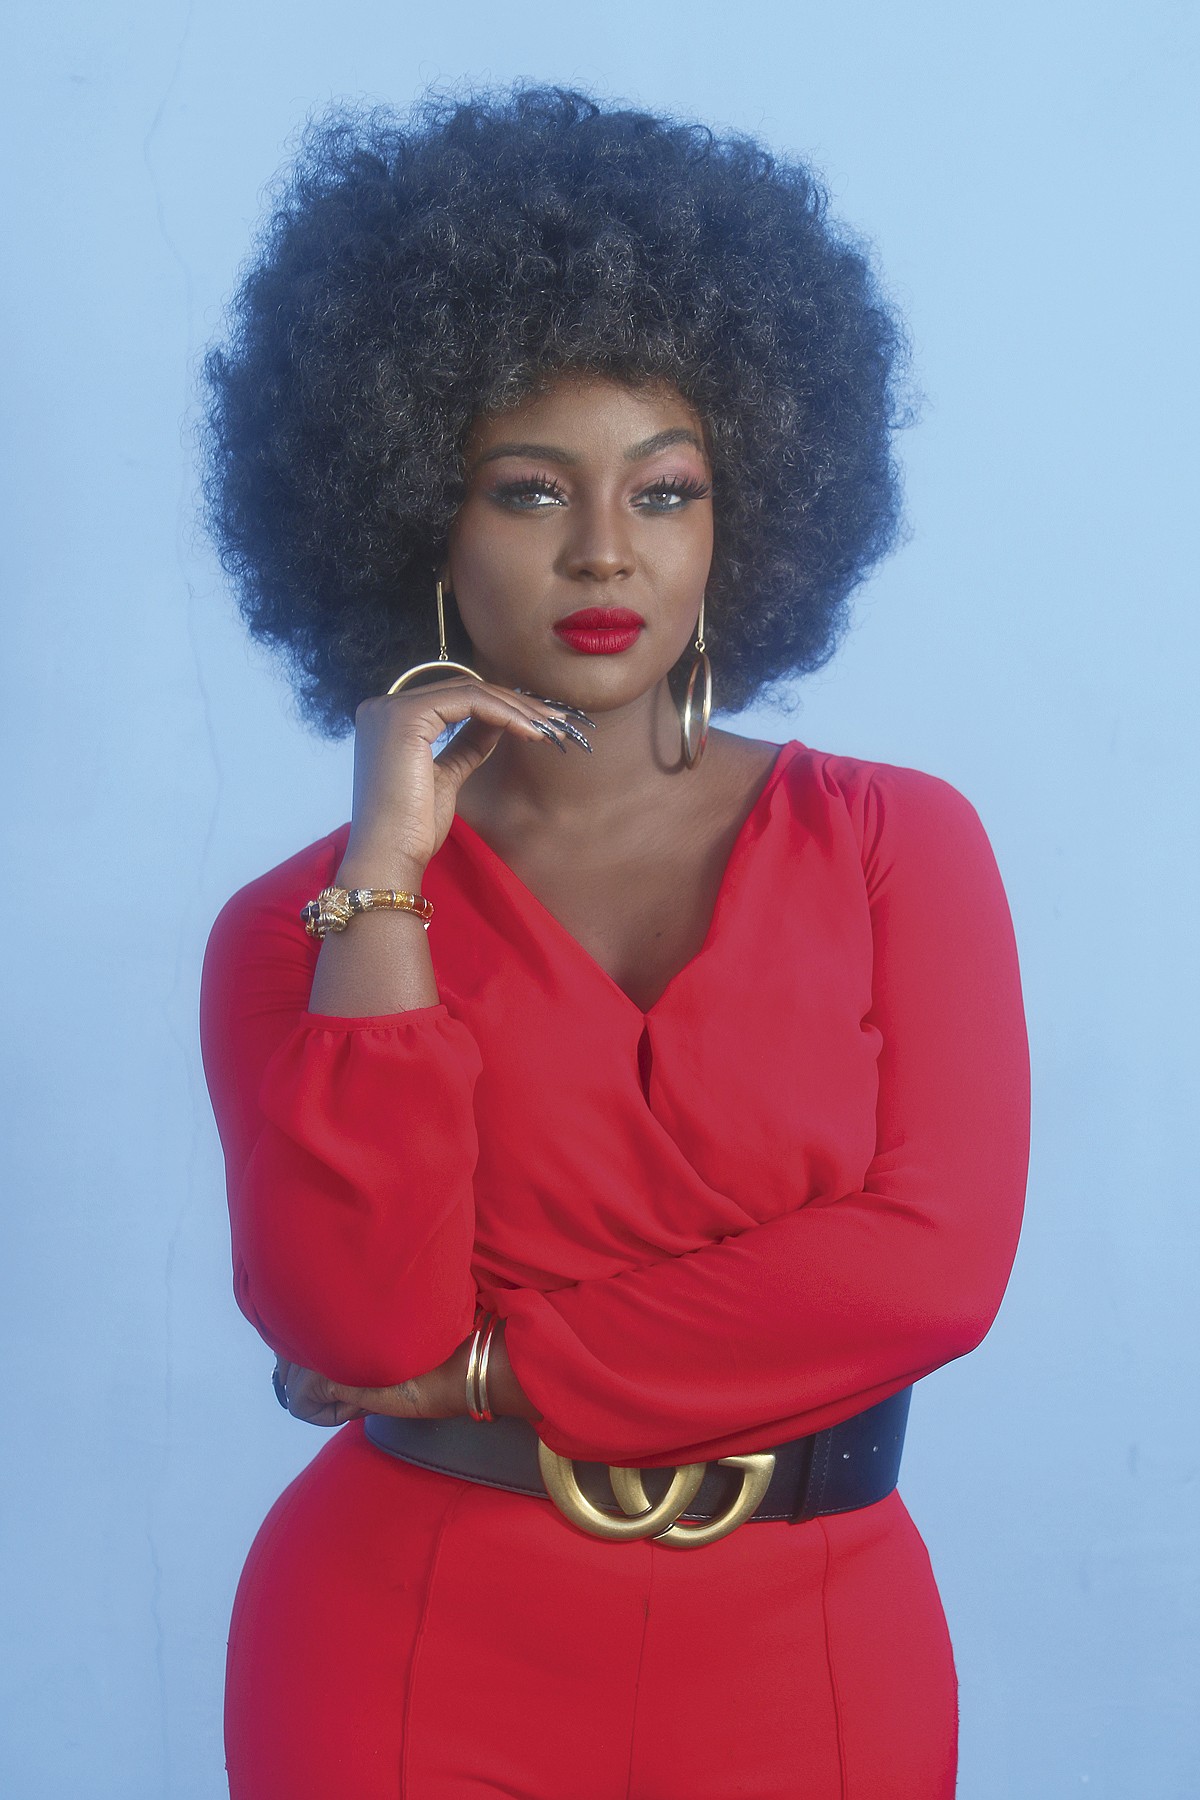 Amara La Negra Talks About Her Afro-Latina Identity and Hair-Care Routine